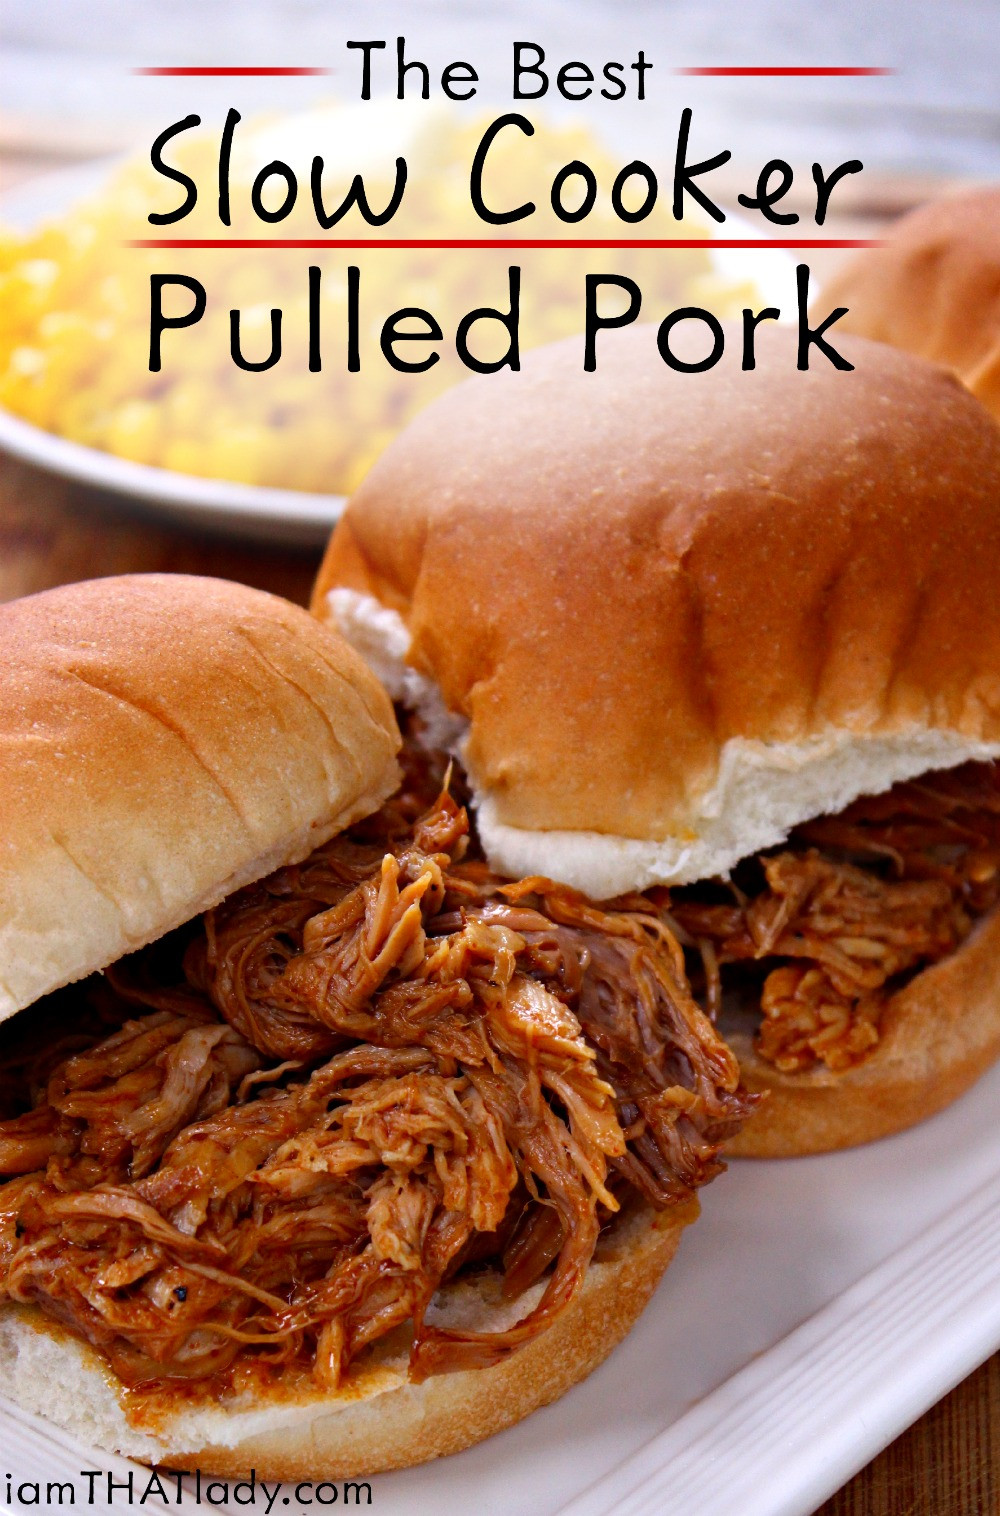 Crockpot Bbq Pork Loin
 Crockpot Pulled Pork can be just as good as the smoked